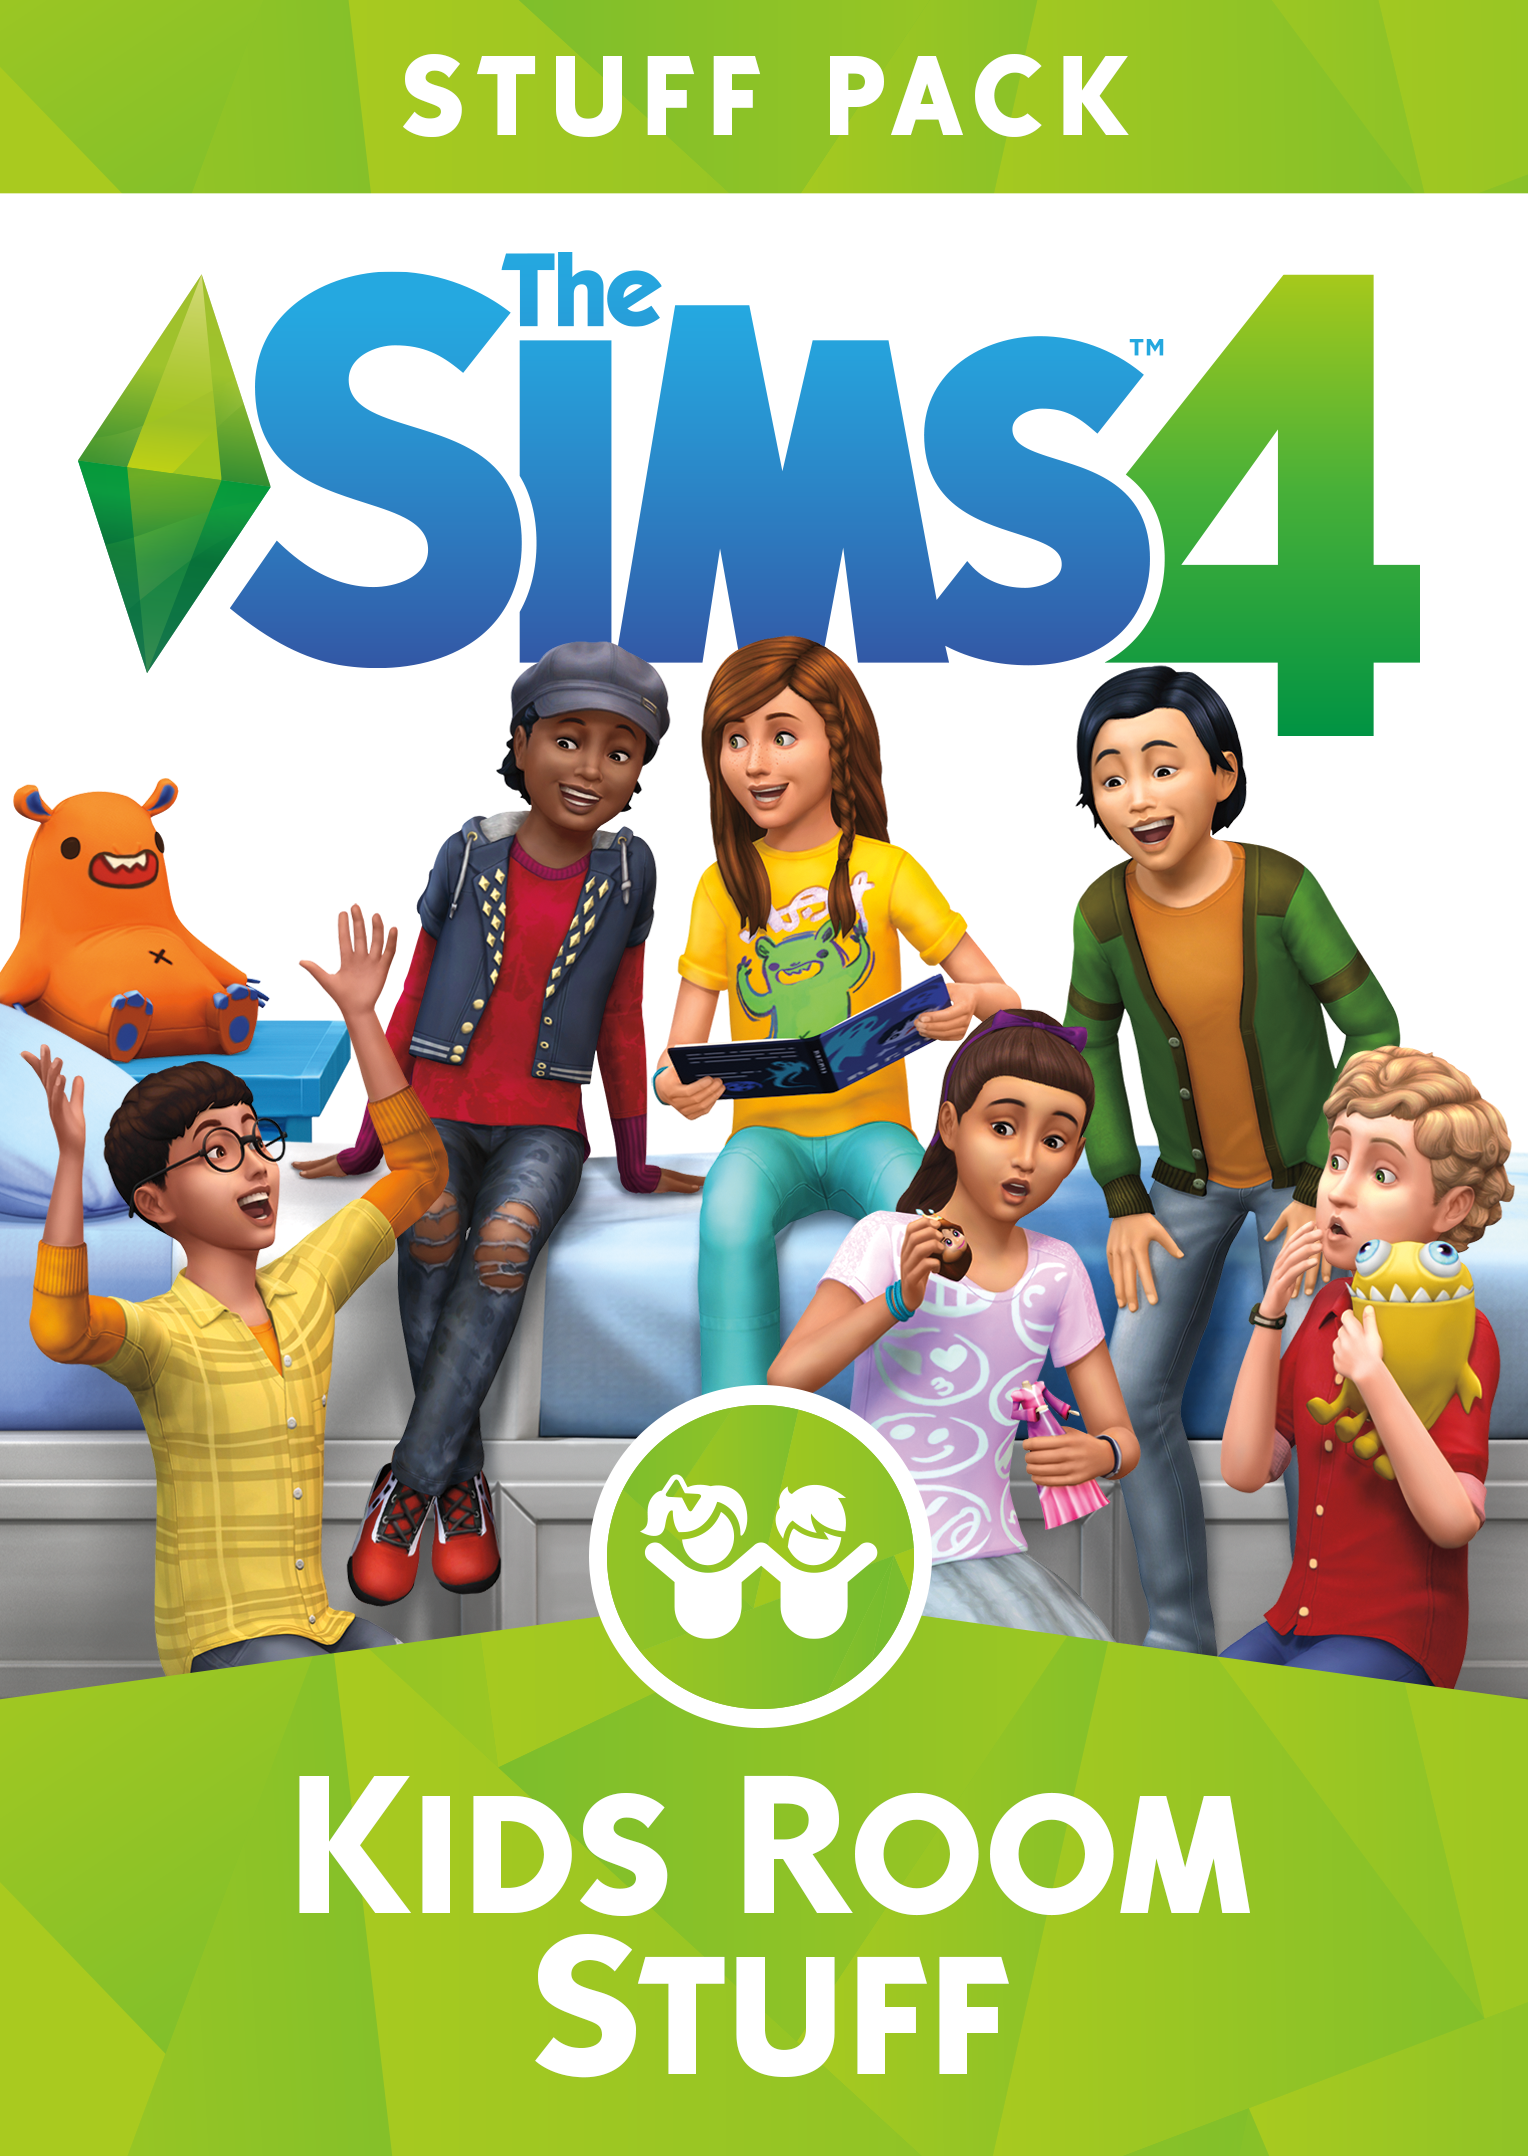 sims 4 kids room stuff pack free download